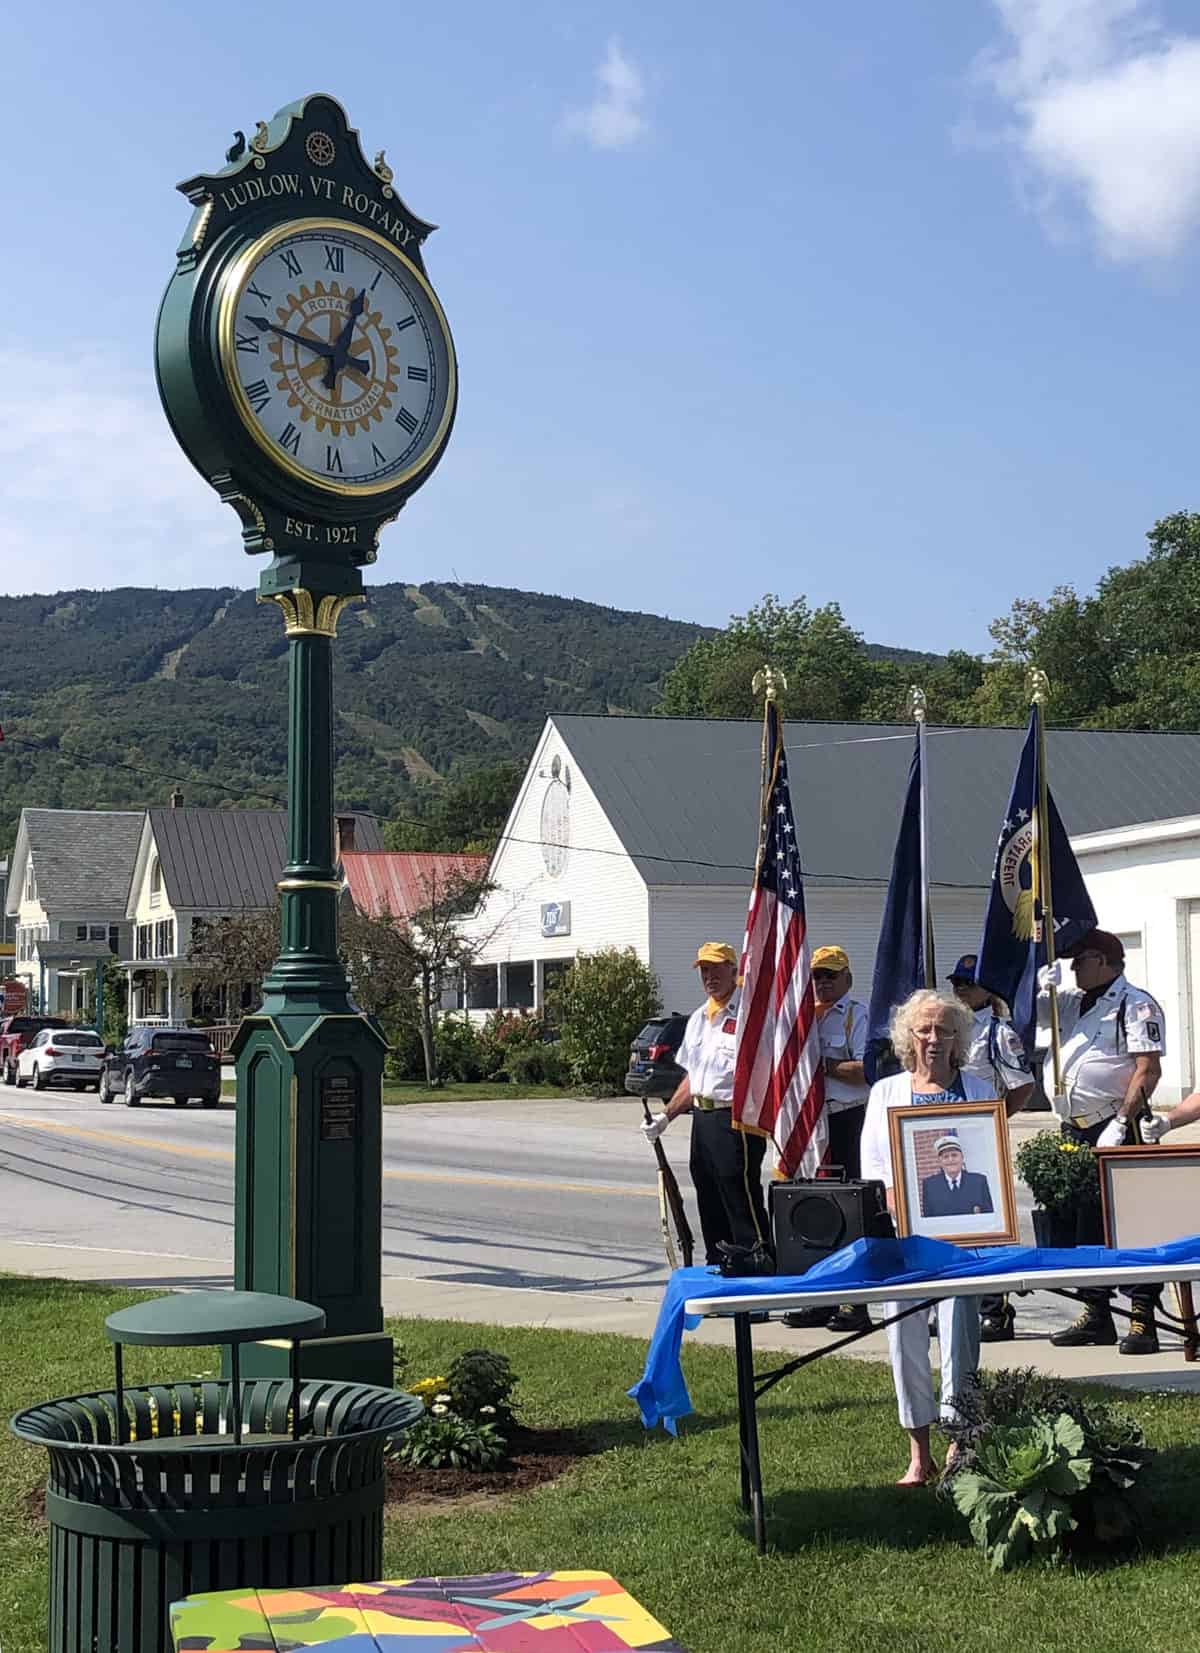 The Ludlow Rotary unveiled a free-standing towering clock on the corner of Elm and Main streets Tuesday, Sept. 14, dedicated to longtime resident and Rotarian Bob Kirkbride. Photo by Sharon Huntley